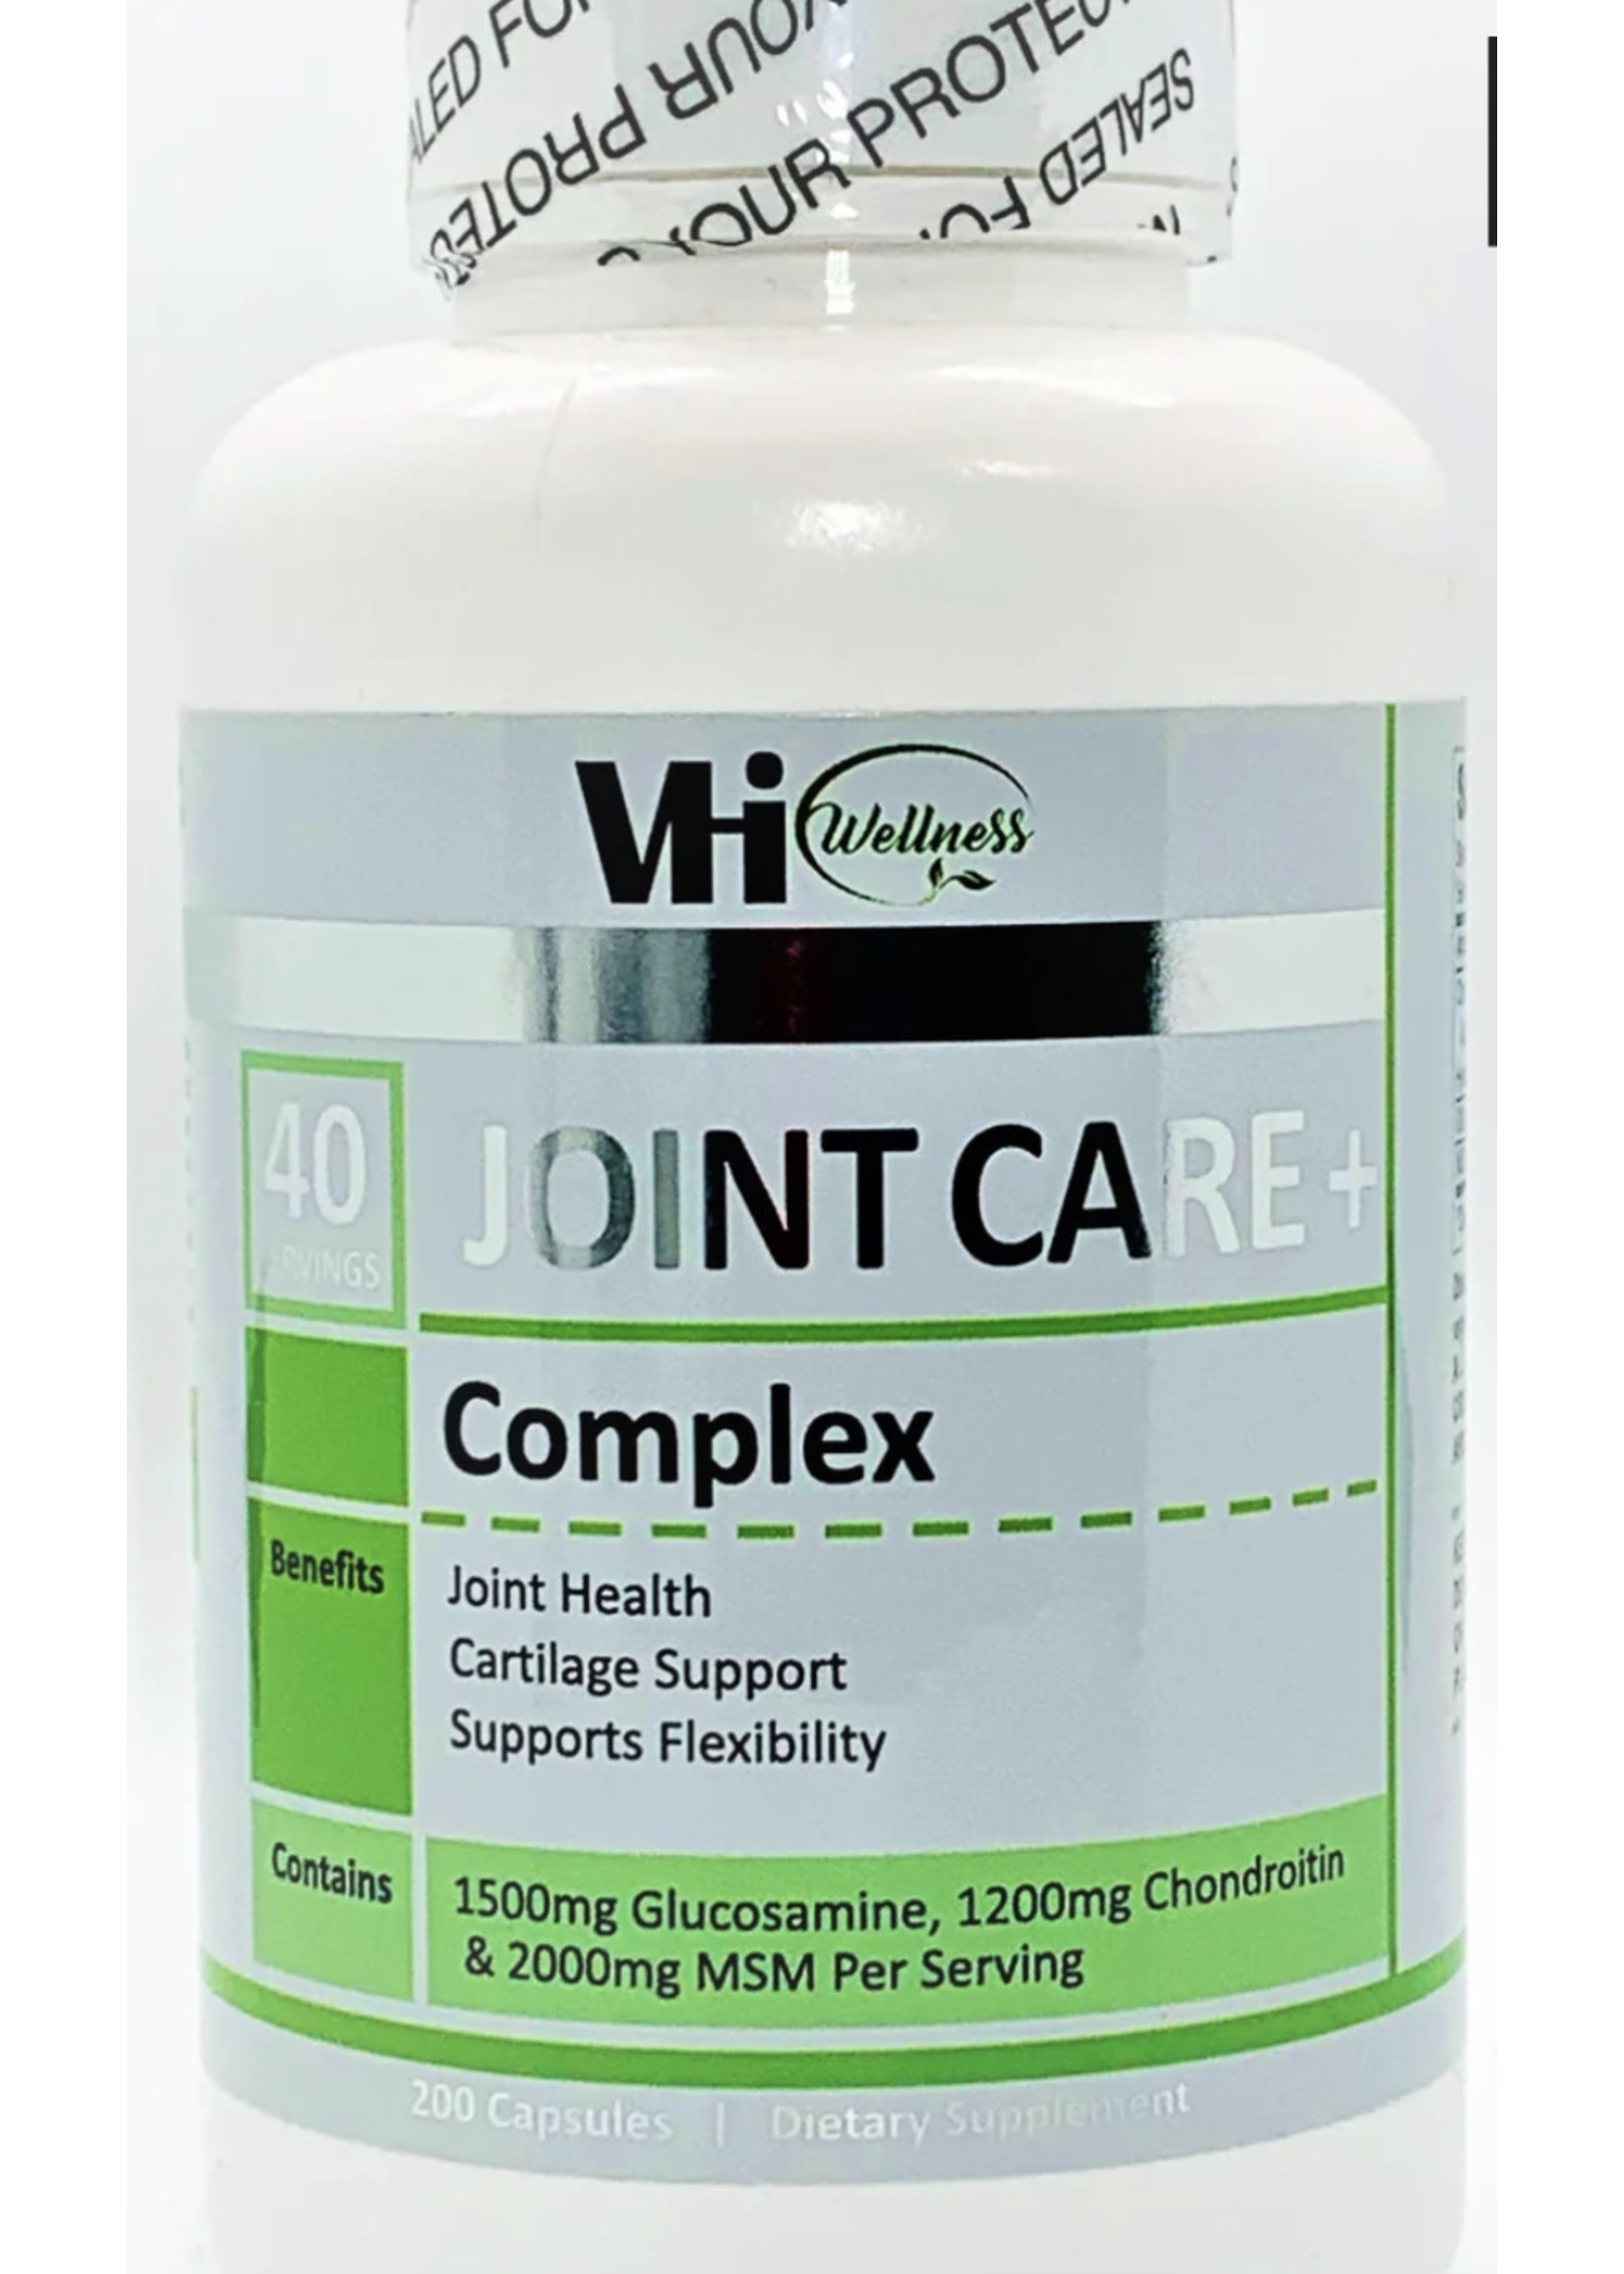 VHi Fit Joint Care Plus